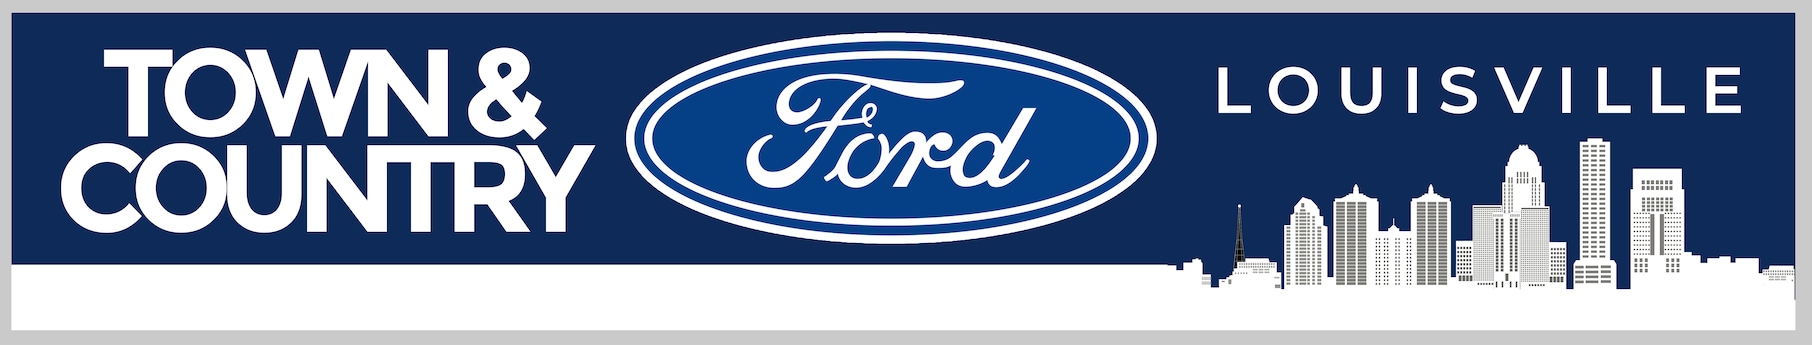 Louisville Town & Country Ford | New & Used Ford Cars